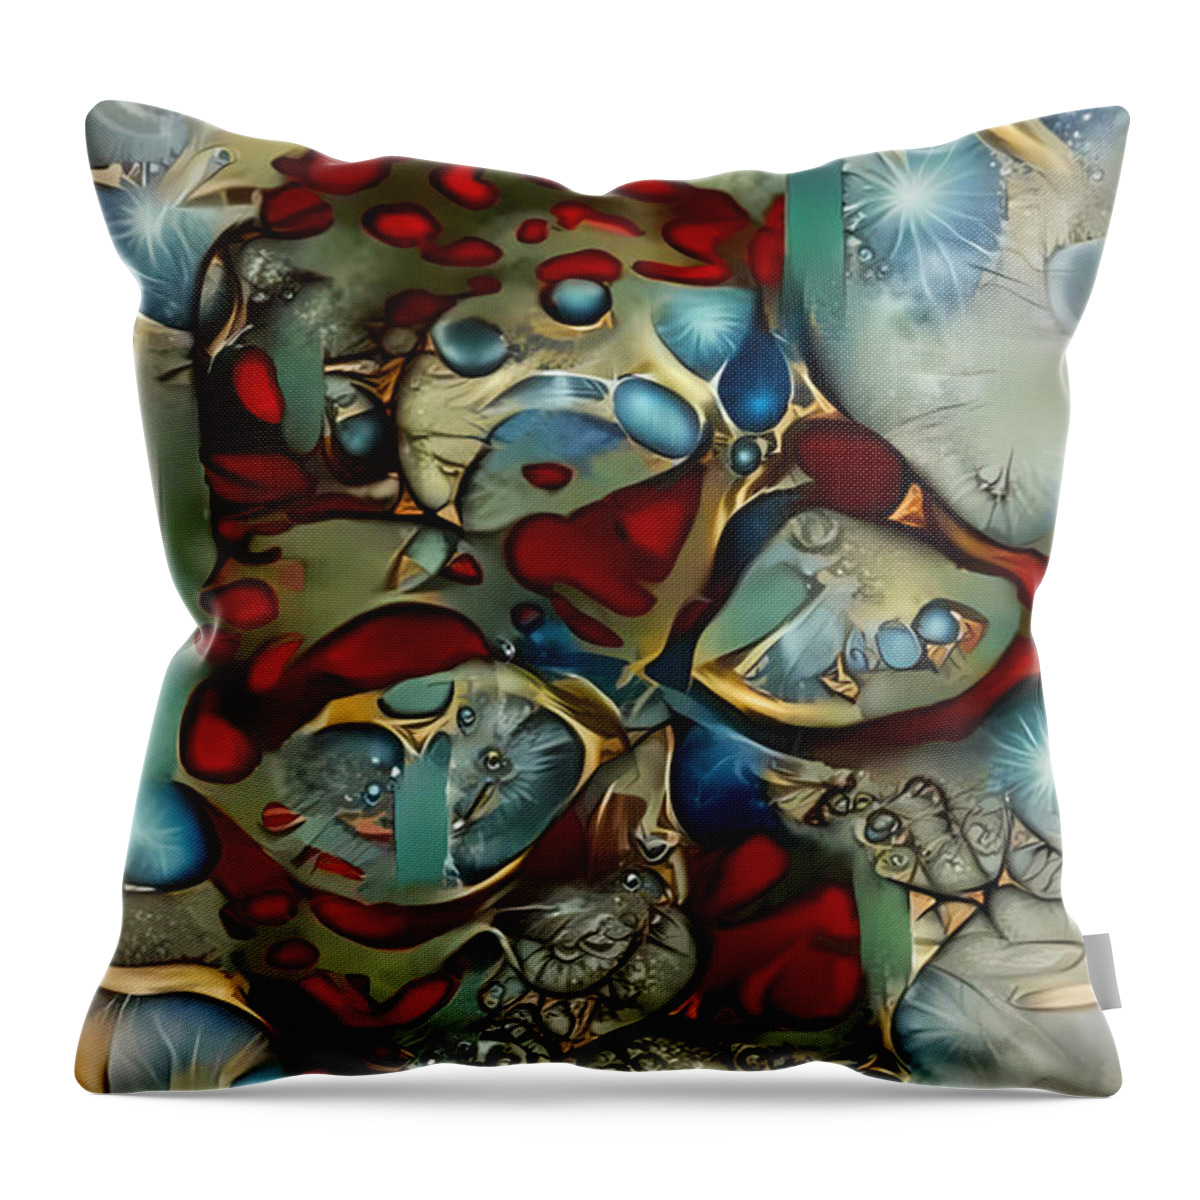 Contemporary Art Throw Pillow featuring the digital art 54 by Jeremiah Ray